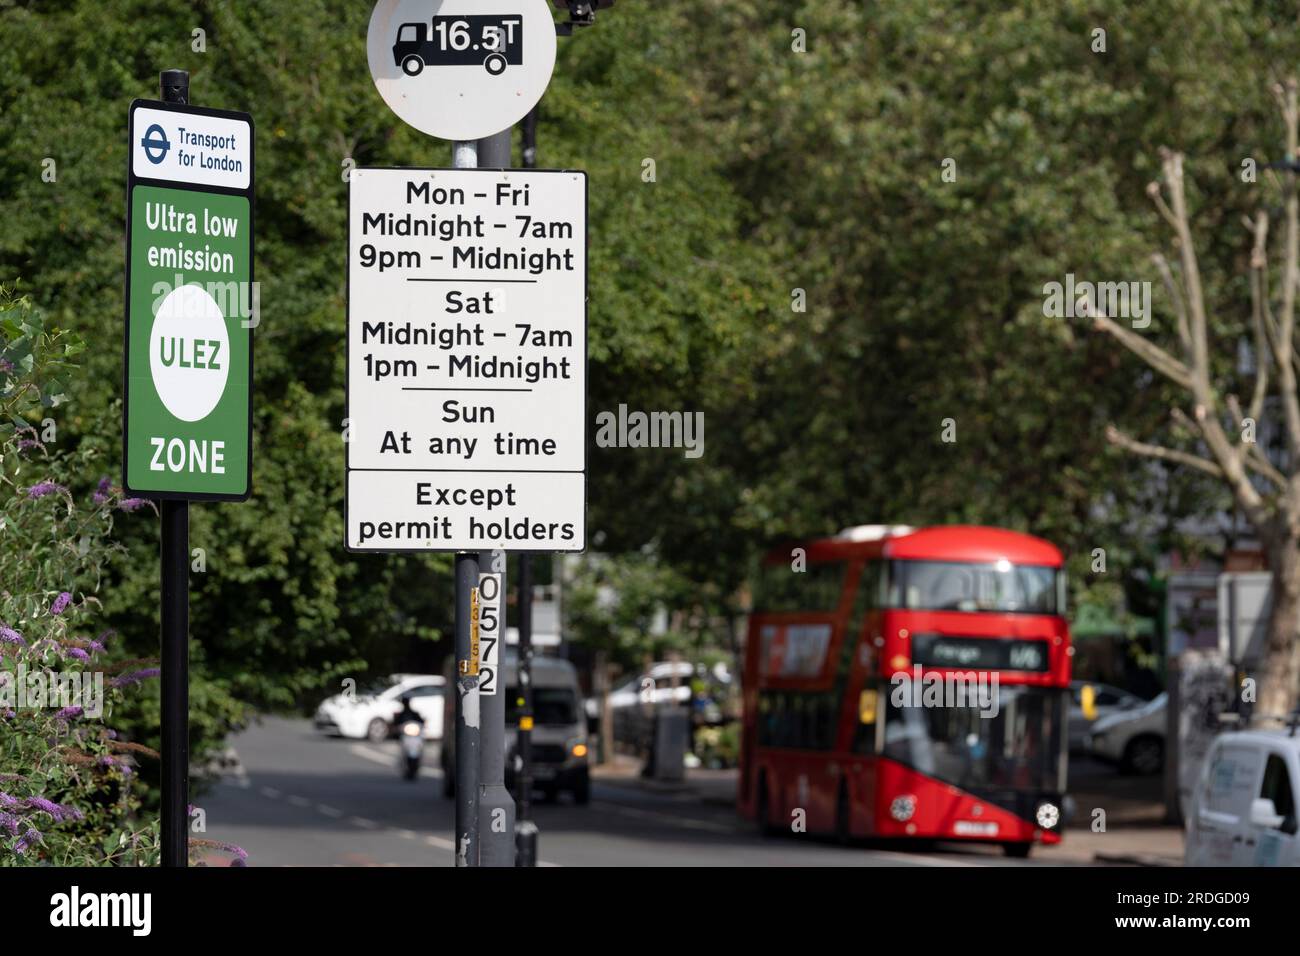 A local bus passes an ULEZ (Ultra Low Emission Zone) sign on the South Circular at East Dulwich, on 21st July 2023, in London, England. Introduced by his Conservative predecessor Boris Johnson, London Mayor Sadiq Khan wants to expand the ULEZ area to a wider London to older vehicles such as polluting diesels and petrol cars, a controversial air quality policy to lower poisonous emissions that harms the health of 1 in 10 children. Drivers of non-exempt vehicles may enter the ULEZ after paying a £12.50 daily fee - or face a £160 penalty. Stock Photo